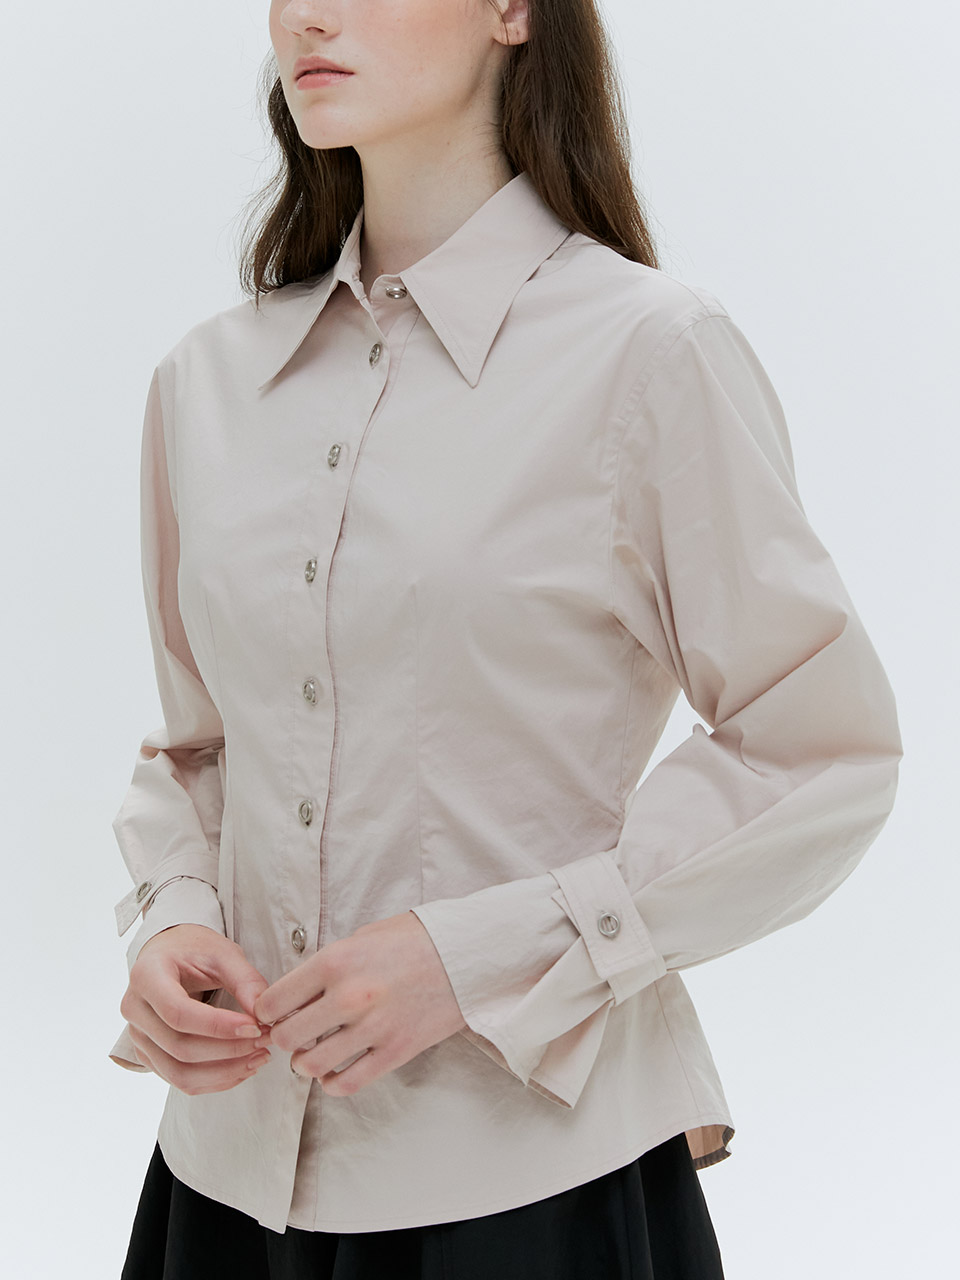 HACIE - RING BUTTON POINTED COLLAR SHIRTS [2 COLOR]